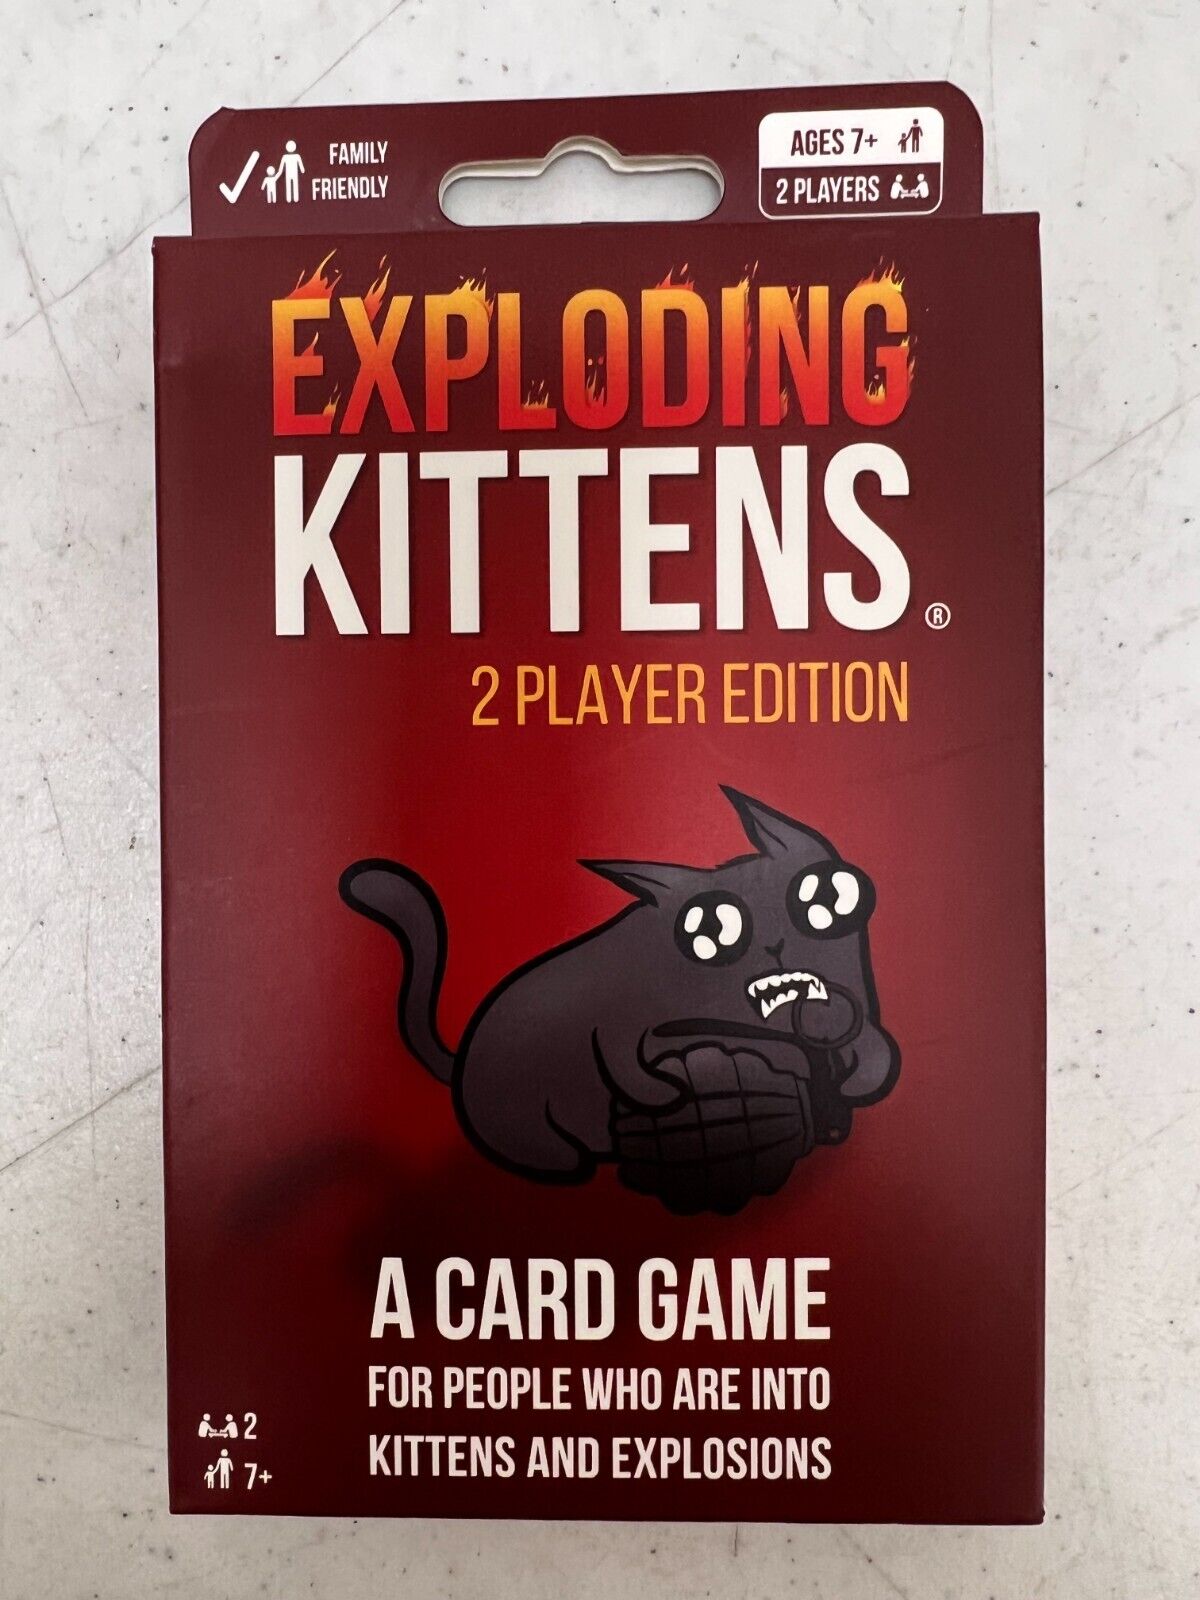 EXPLODING KITTENS 2 Player Edition Card Game People Into Kittens & Explosions 